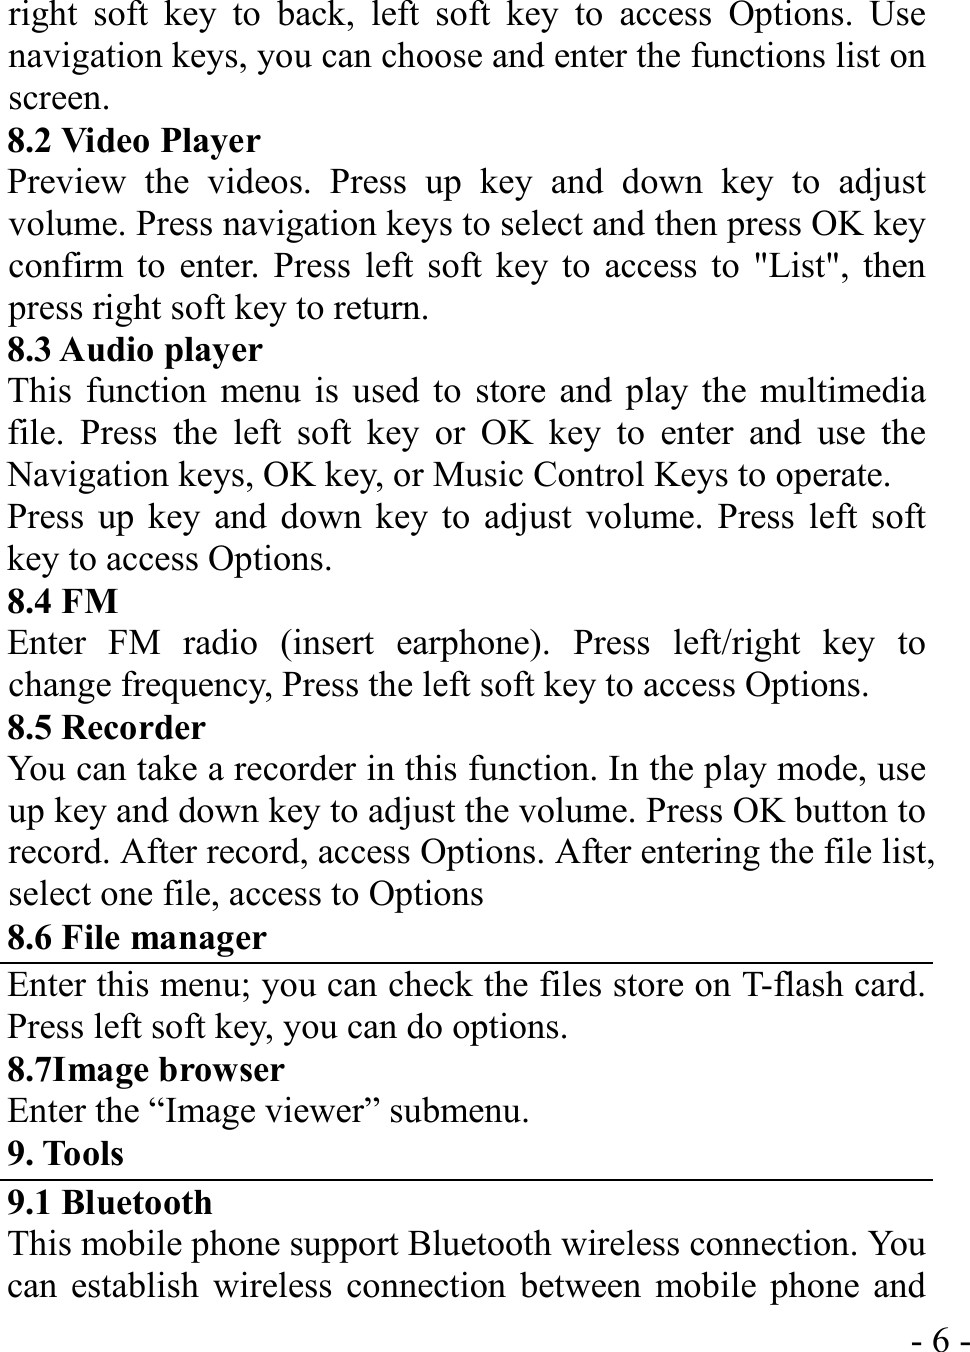  - 6 -right soft key to back, left soft key to access Options. Use navigation keys, you can choose and enter the functions list on screen. 8.2 Video Player Preview the videos. Press up key and down key to adjust volume. Press navigation keys to select and then press OK key confirm to enter. Press left soft key to access to &quot;List&quot;, then press right soft key to return. 8.3 Audio player This function menu is used to store and play the multimedia file. Press the left soft key or OK key to enter and use the Navigation keys, OK key, or Music Control Keys to operate. Press up key and down key to adjust volume. Press left soft key to access Options. 8.4 FM   Enter FM radio (insert earphone). Press left/right key to change frequency, Press the left soft key to access Options. 8.5 Recorder You can take a recorder in this function. In the play mode, use up key and down key to adjust the volume. Press OK button to record. After record, access Options. After entering the file list, select one file, access to Options 8.6 File manager Enter this menu; you can check the files store on T-flash card. Press left soft key, you can do options. 8.7Image browser Enter the “Image viewer” submenu. 9. Tools 9.1 Bluetooth This mobile phone support Bluetooth wireless connection. You can establish wireless connection between mobile phone and 